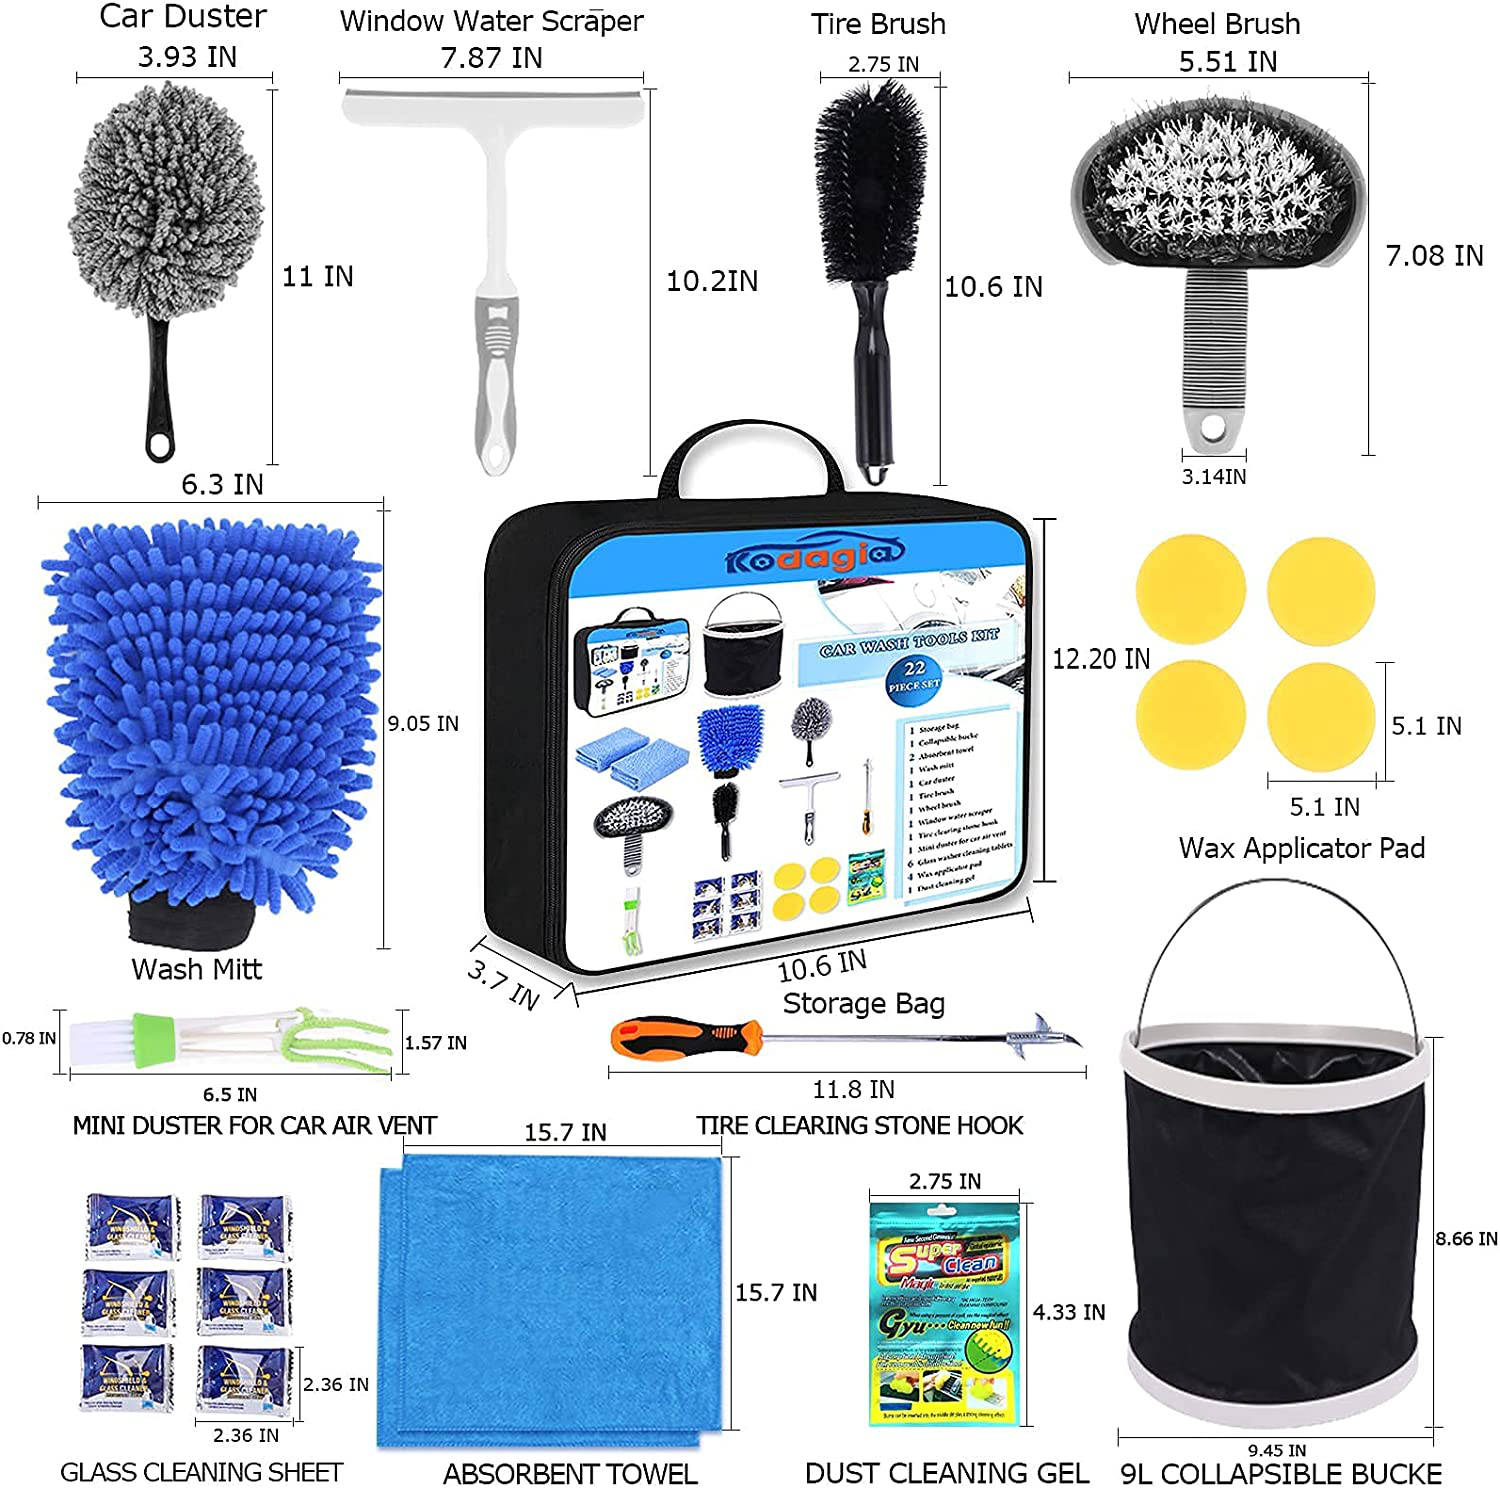 Kodagia 22pcs Car Wash Kit Car Detailing Kit Cleaning Tool Sets with Collapsible Bucket, Microfiber Towel, Tire Brush, Window Scraper, Car Wash Sponges and Dust Cleaning Gel Complete Car Care Kit